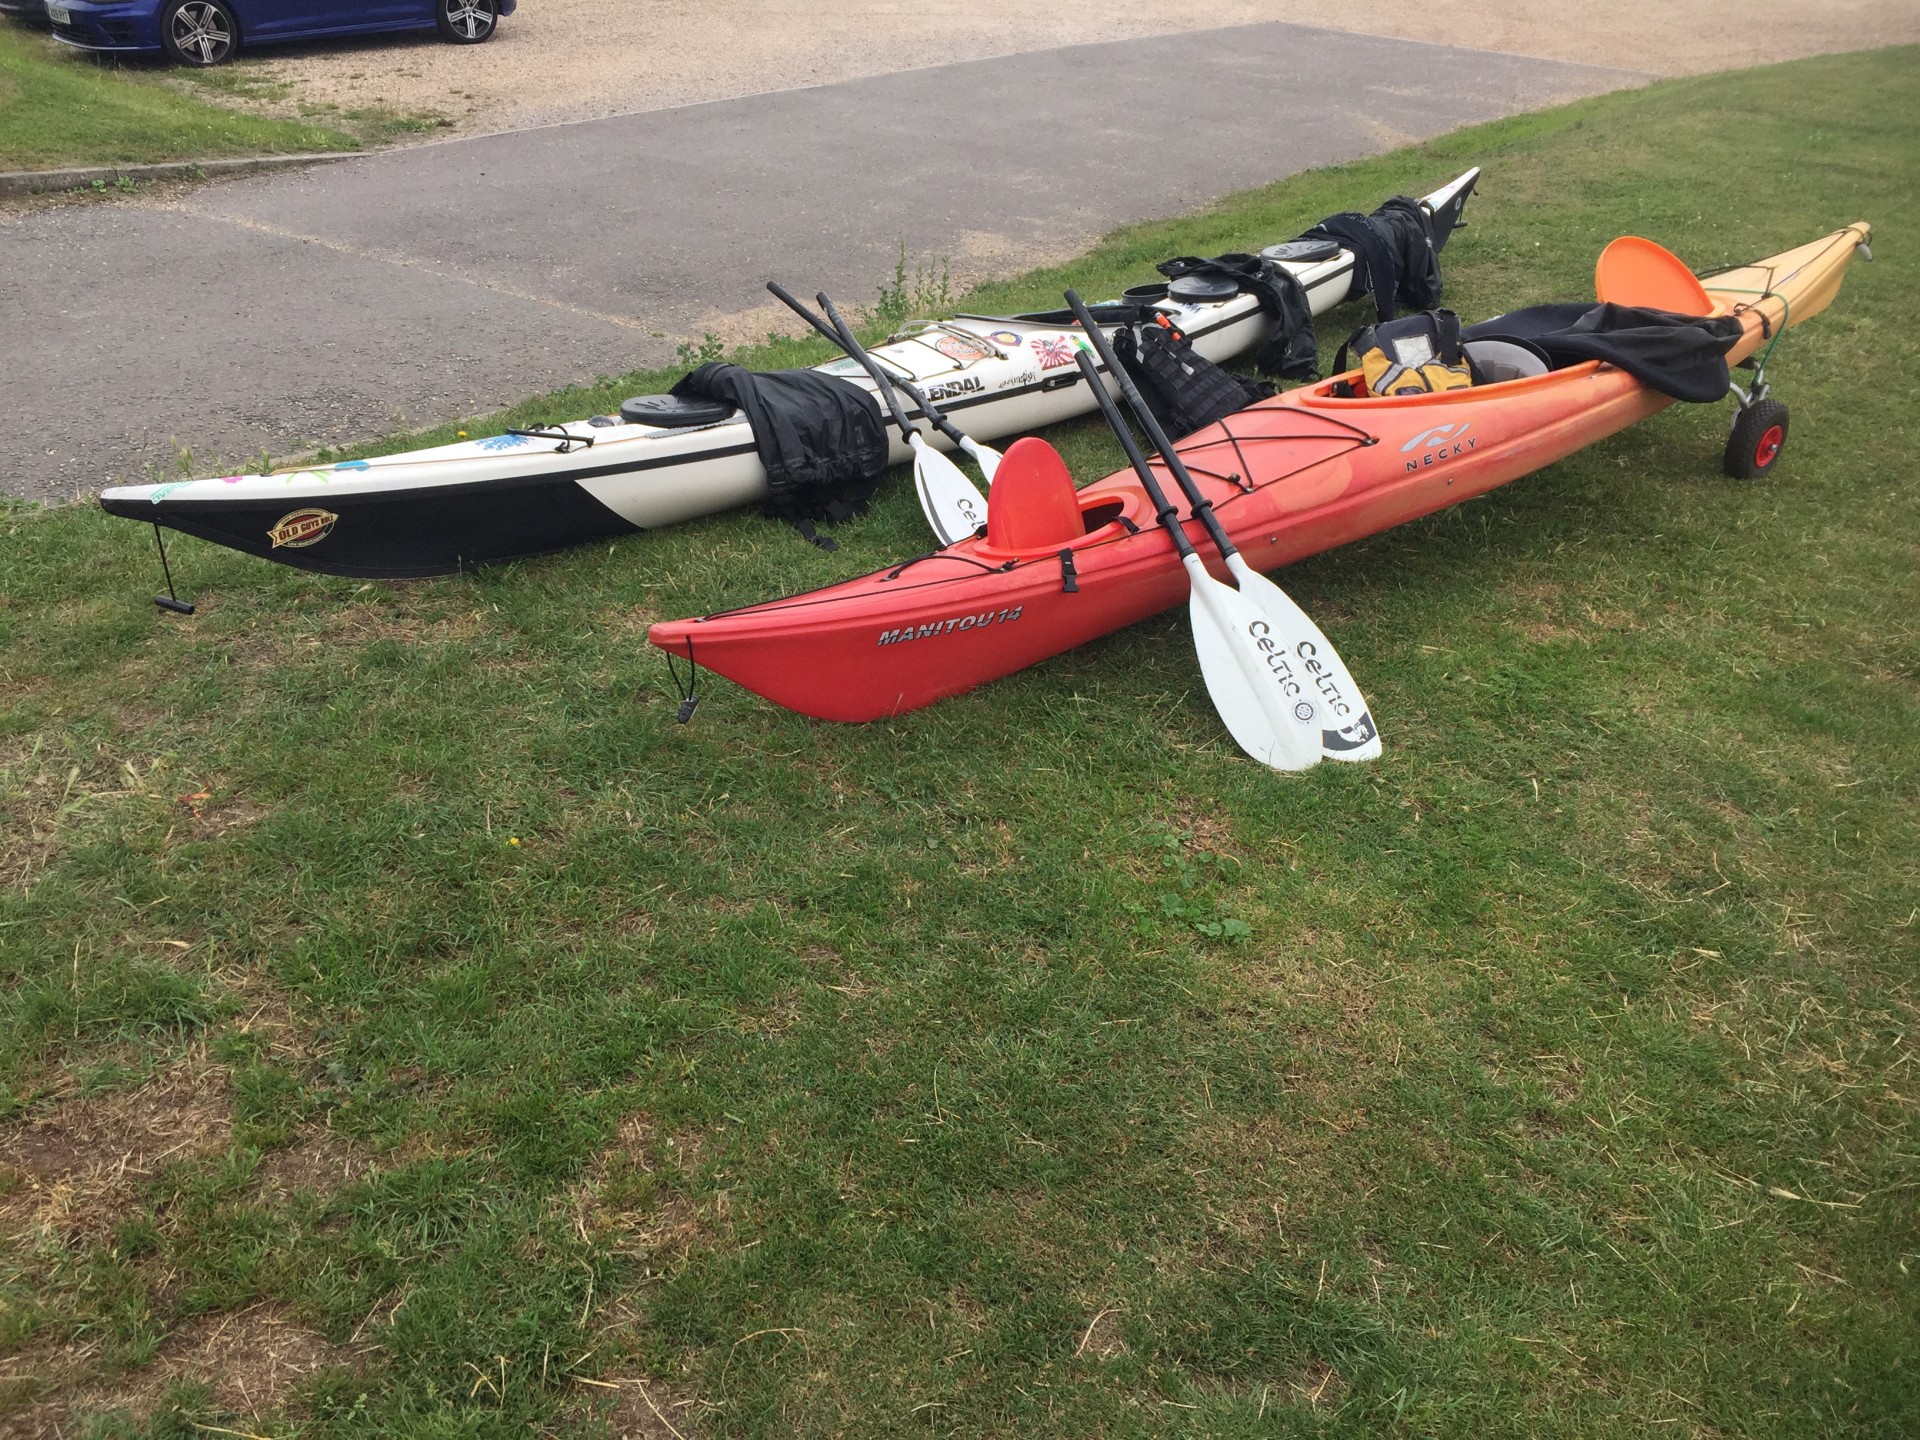 Two sea kayaks on the grass with split spare paddles.